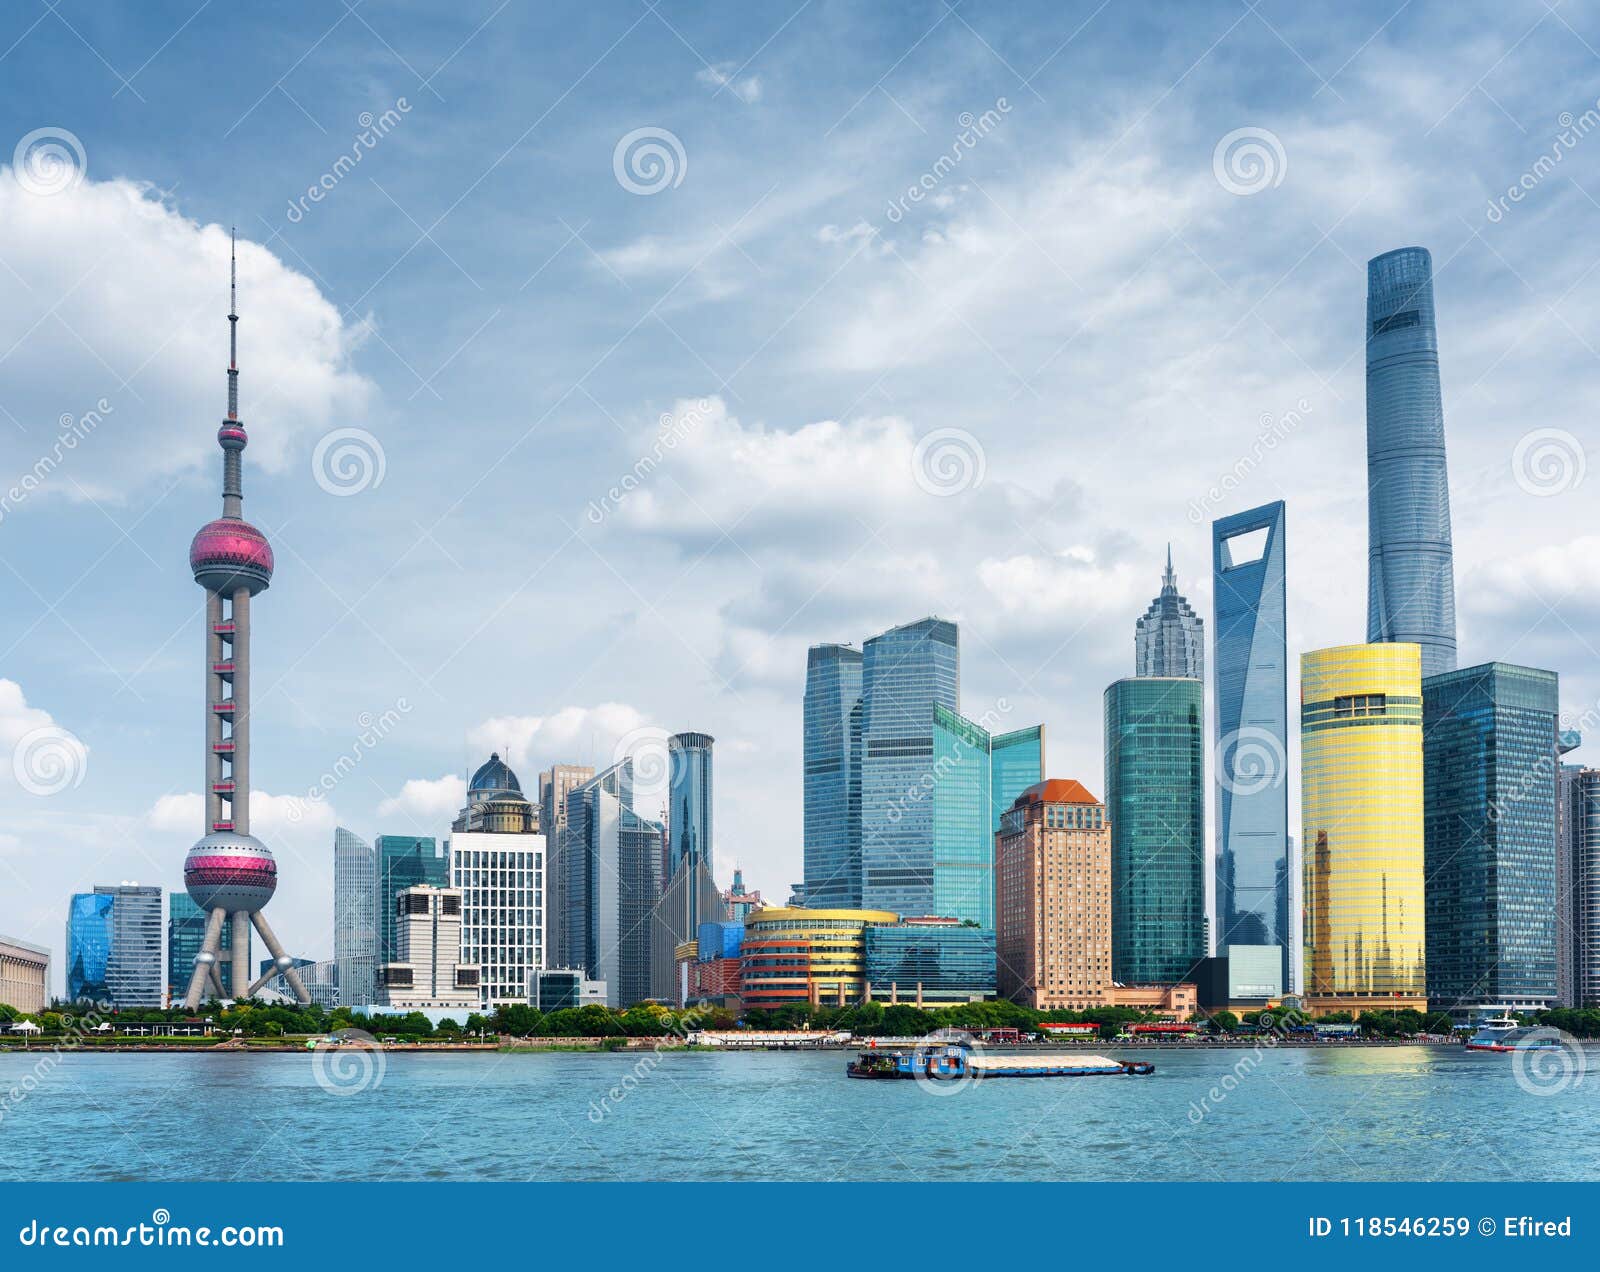 View Of Pudong Skyline Shanghai China Skyscrapers Of Downtown Stock Image Image Of Asia Modern